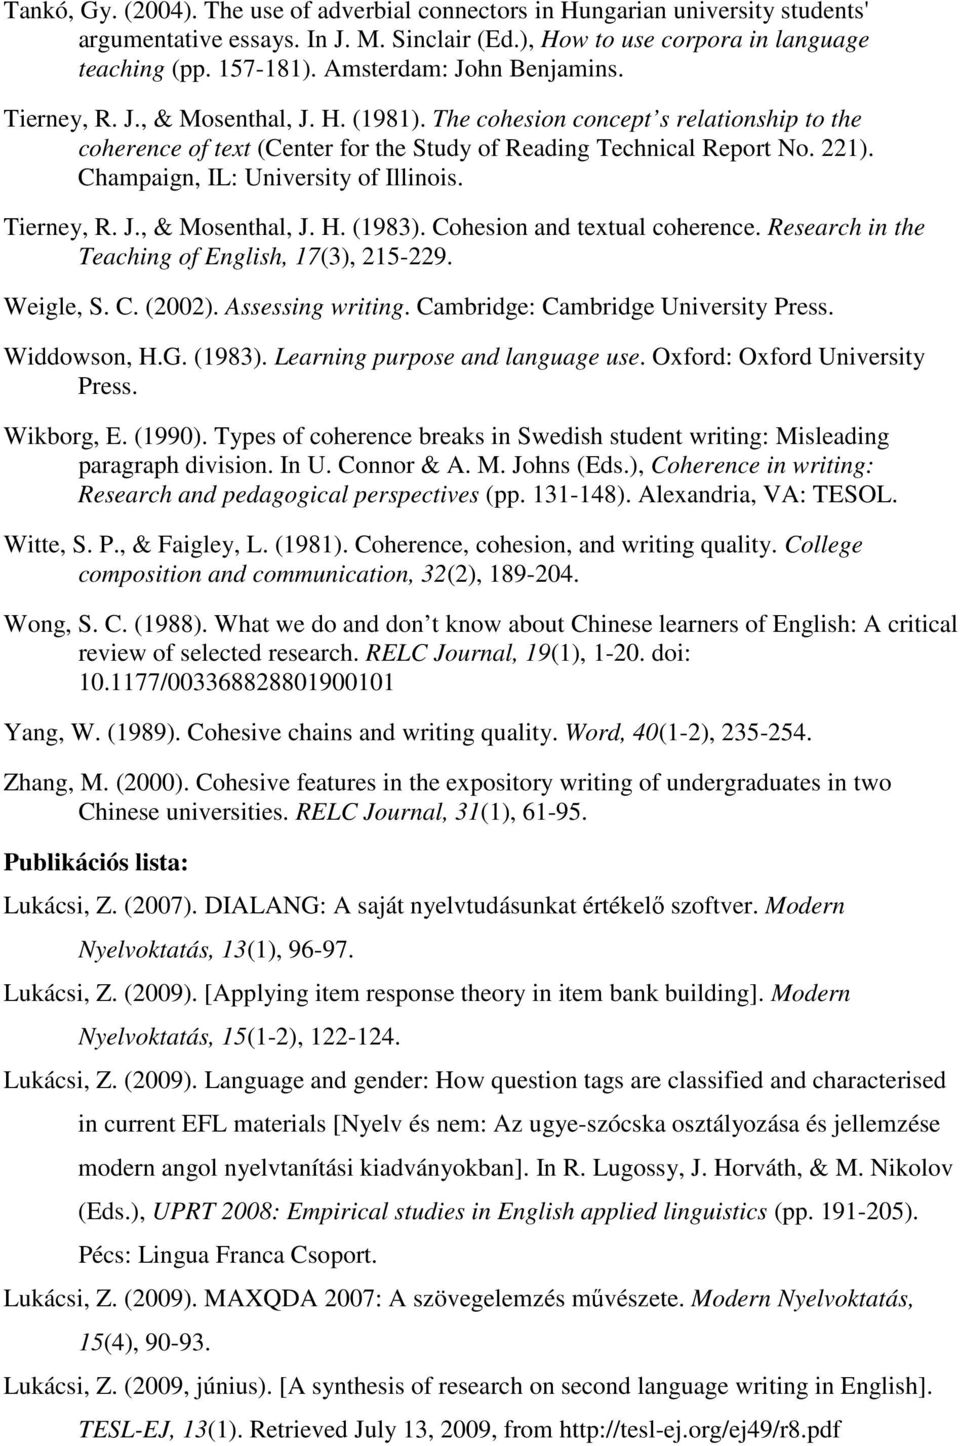 Champaign, IL: University of Illinois. Tierney, R. J., & Mosenthal, J. H. (1983). Cohesion and textual coherence. Research in the Teaching of English, 17(3), 215-229. Weigle, S. C. (2002).